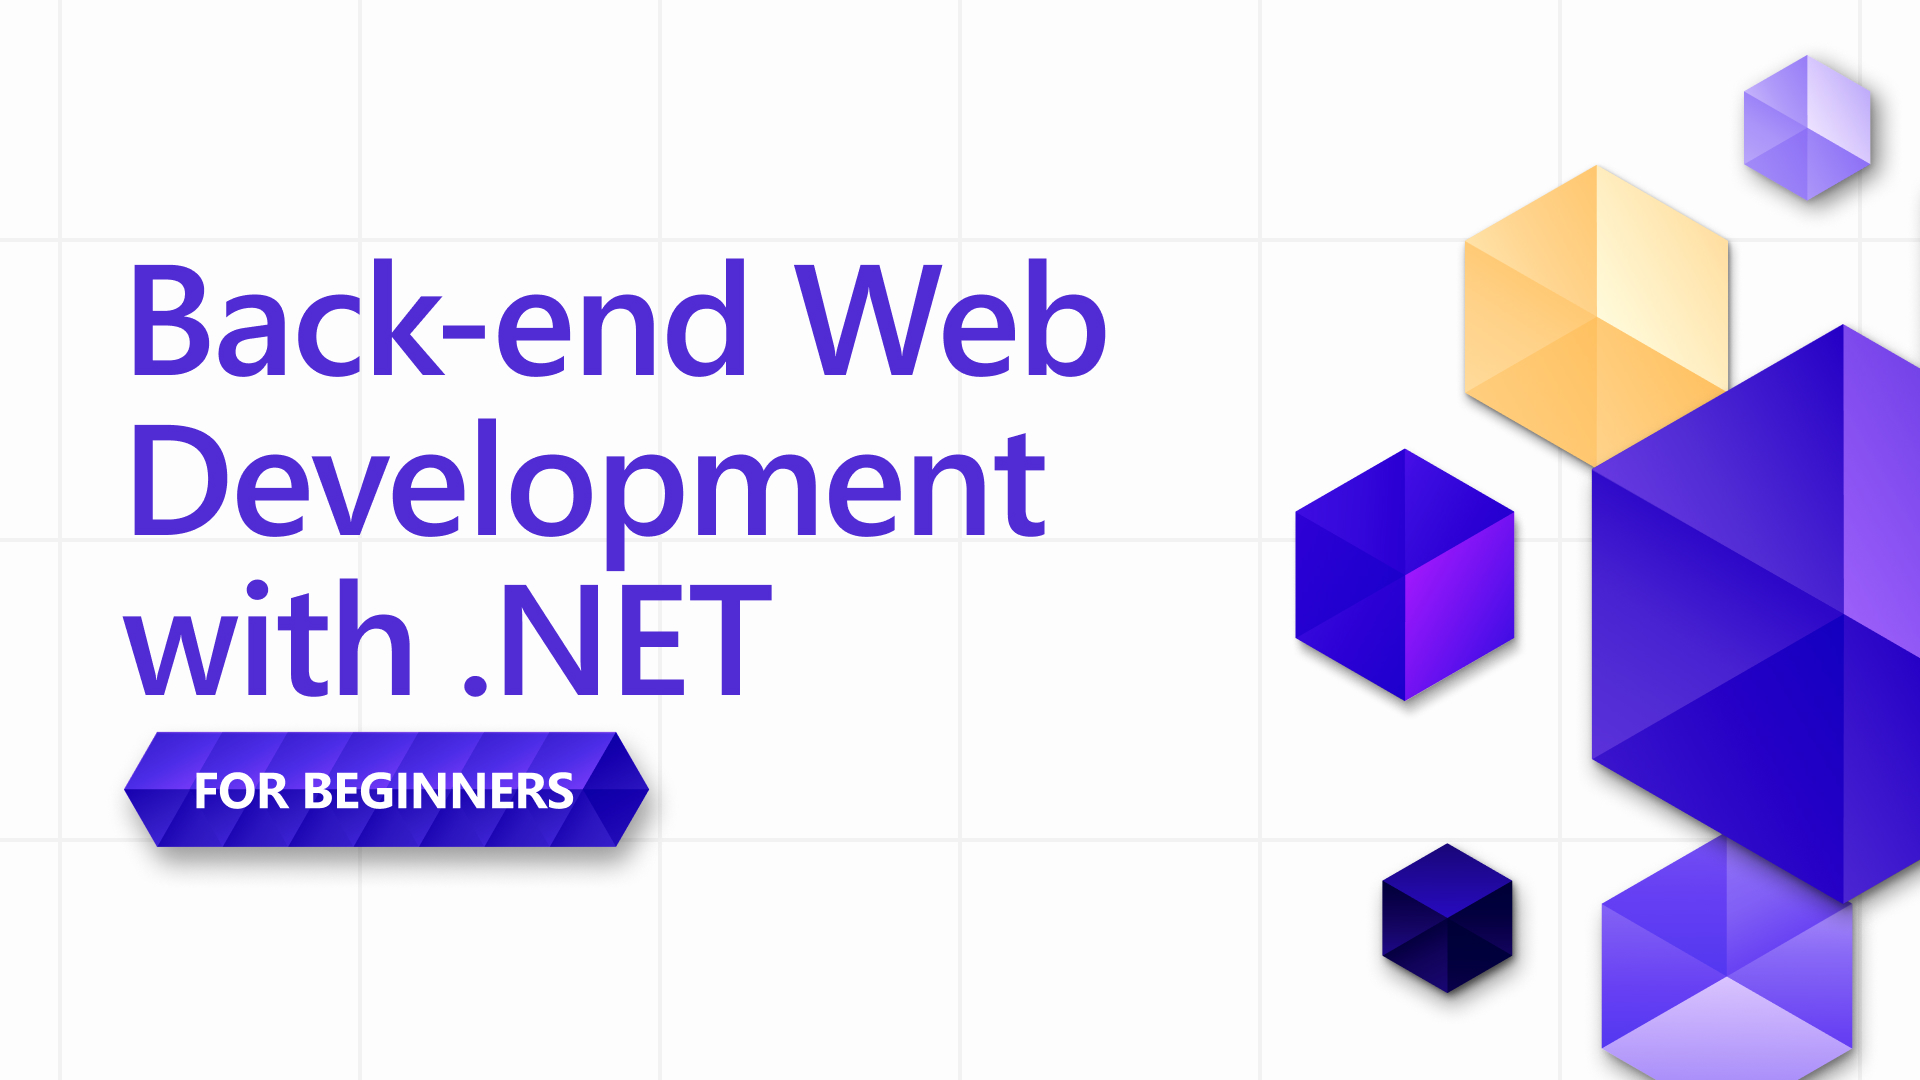 Back-end Web Development with .NET for Beginners